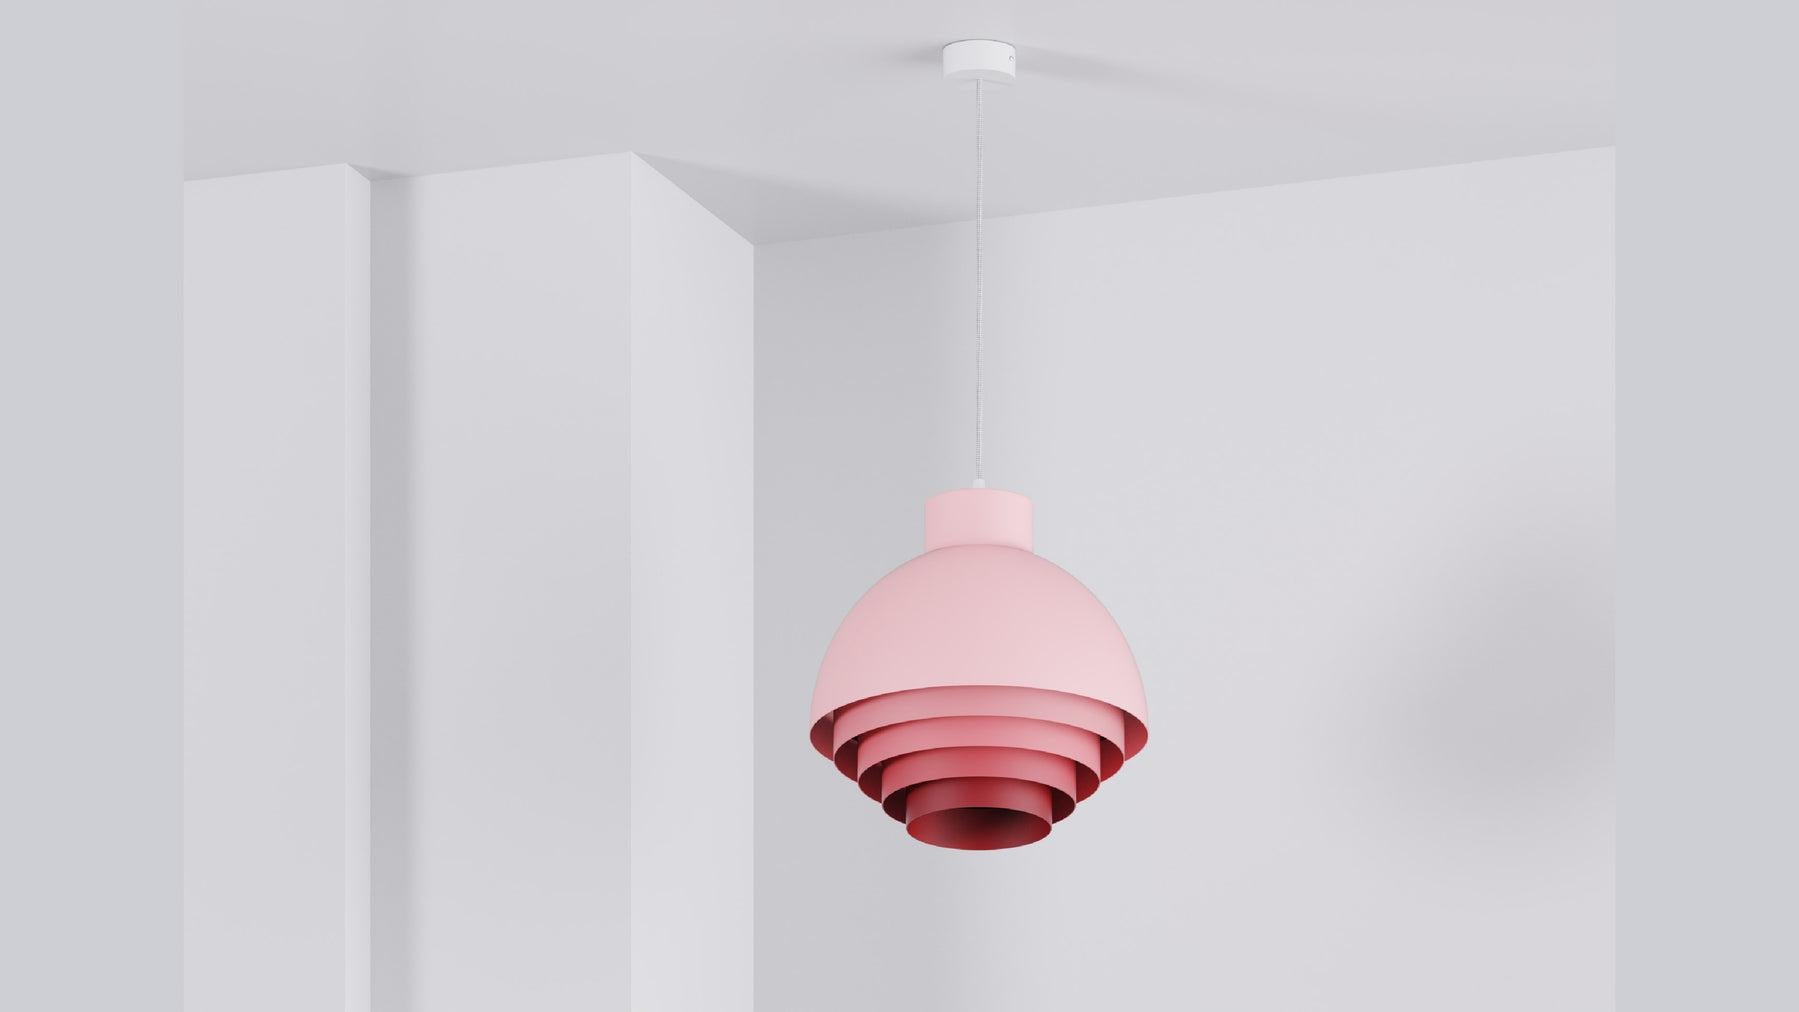 The Strata pendant lamp is inspired by mid-century Scandinavian design and is made in powder-coated steel and brass. The extended louvre detailing in the Strata enables a number of colour combinations and materials to be investigated within this